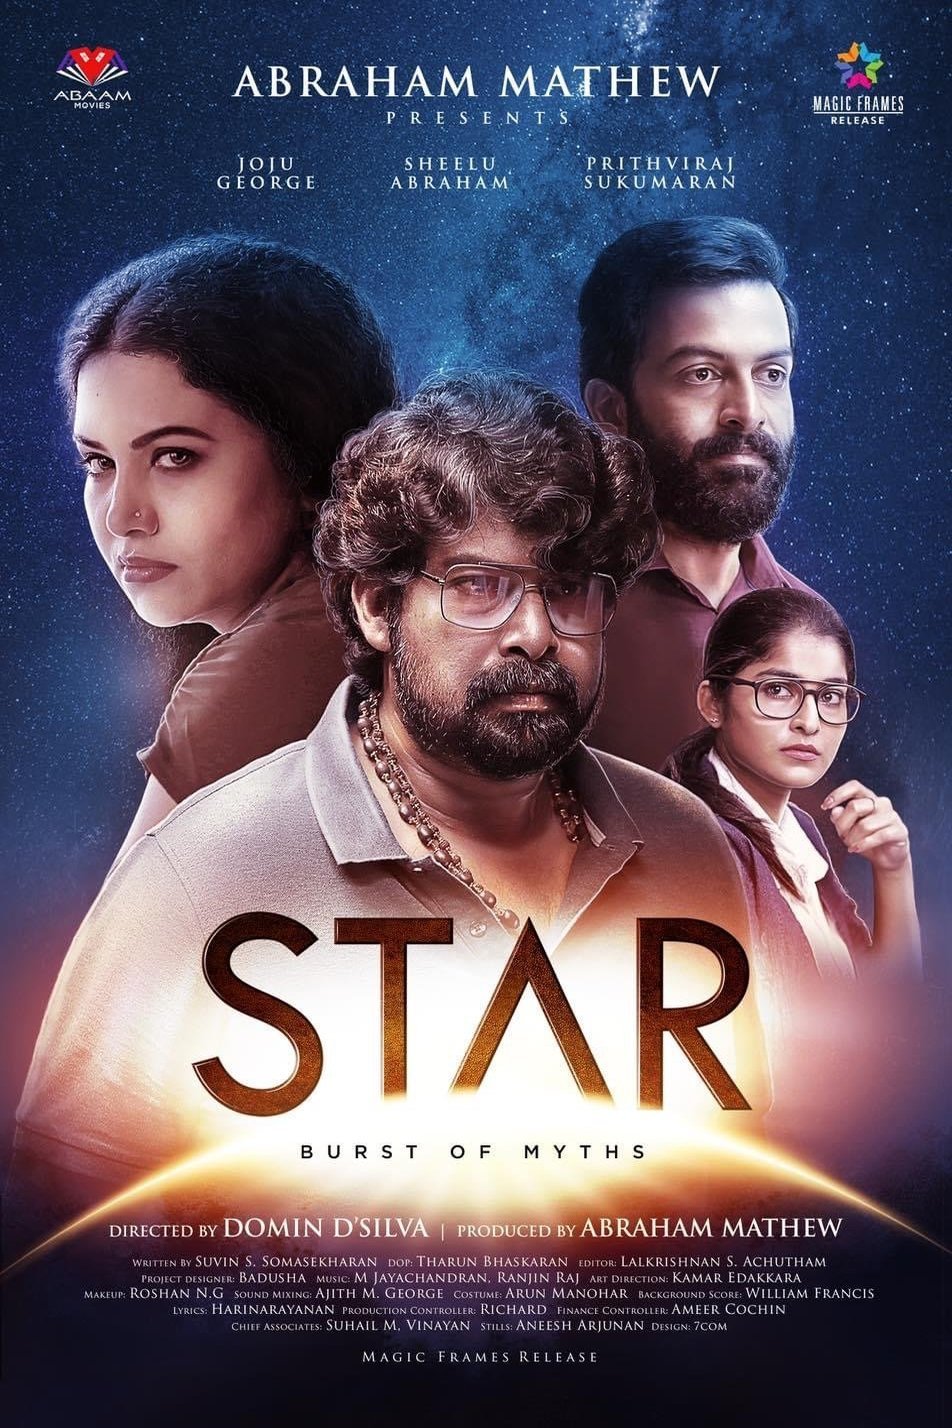 Malayalam poster of the movie Star